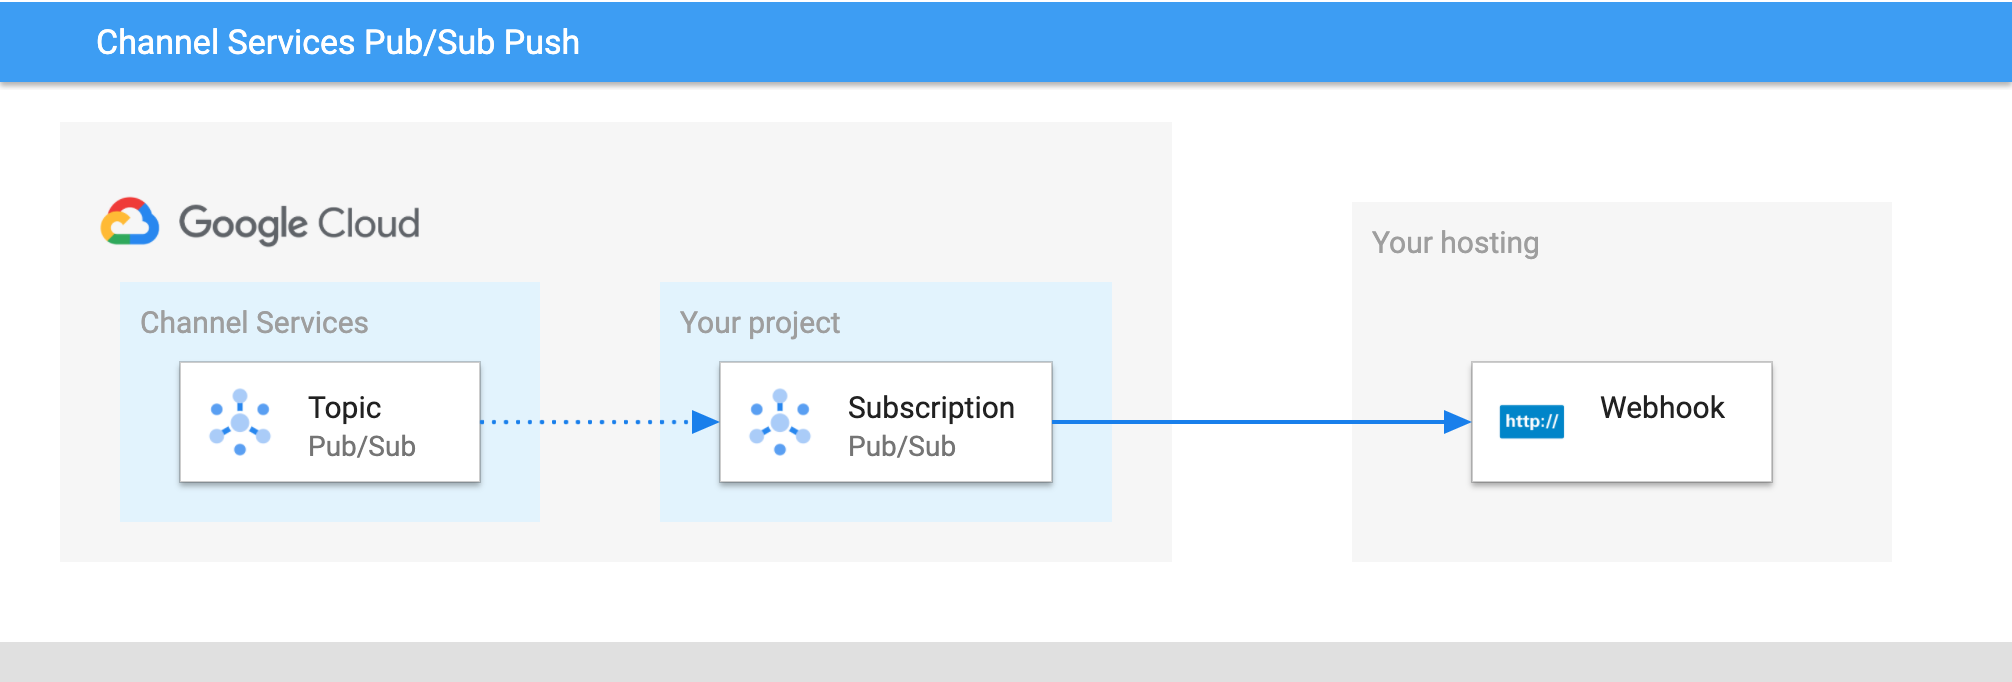 Push notifications for Channel Services